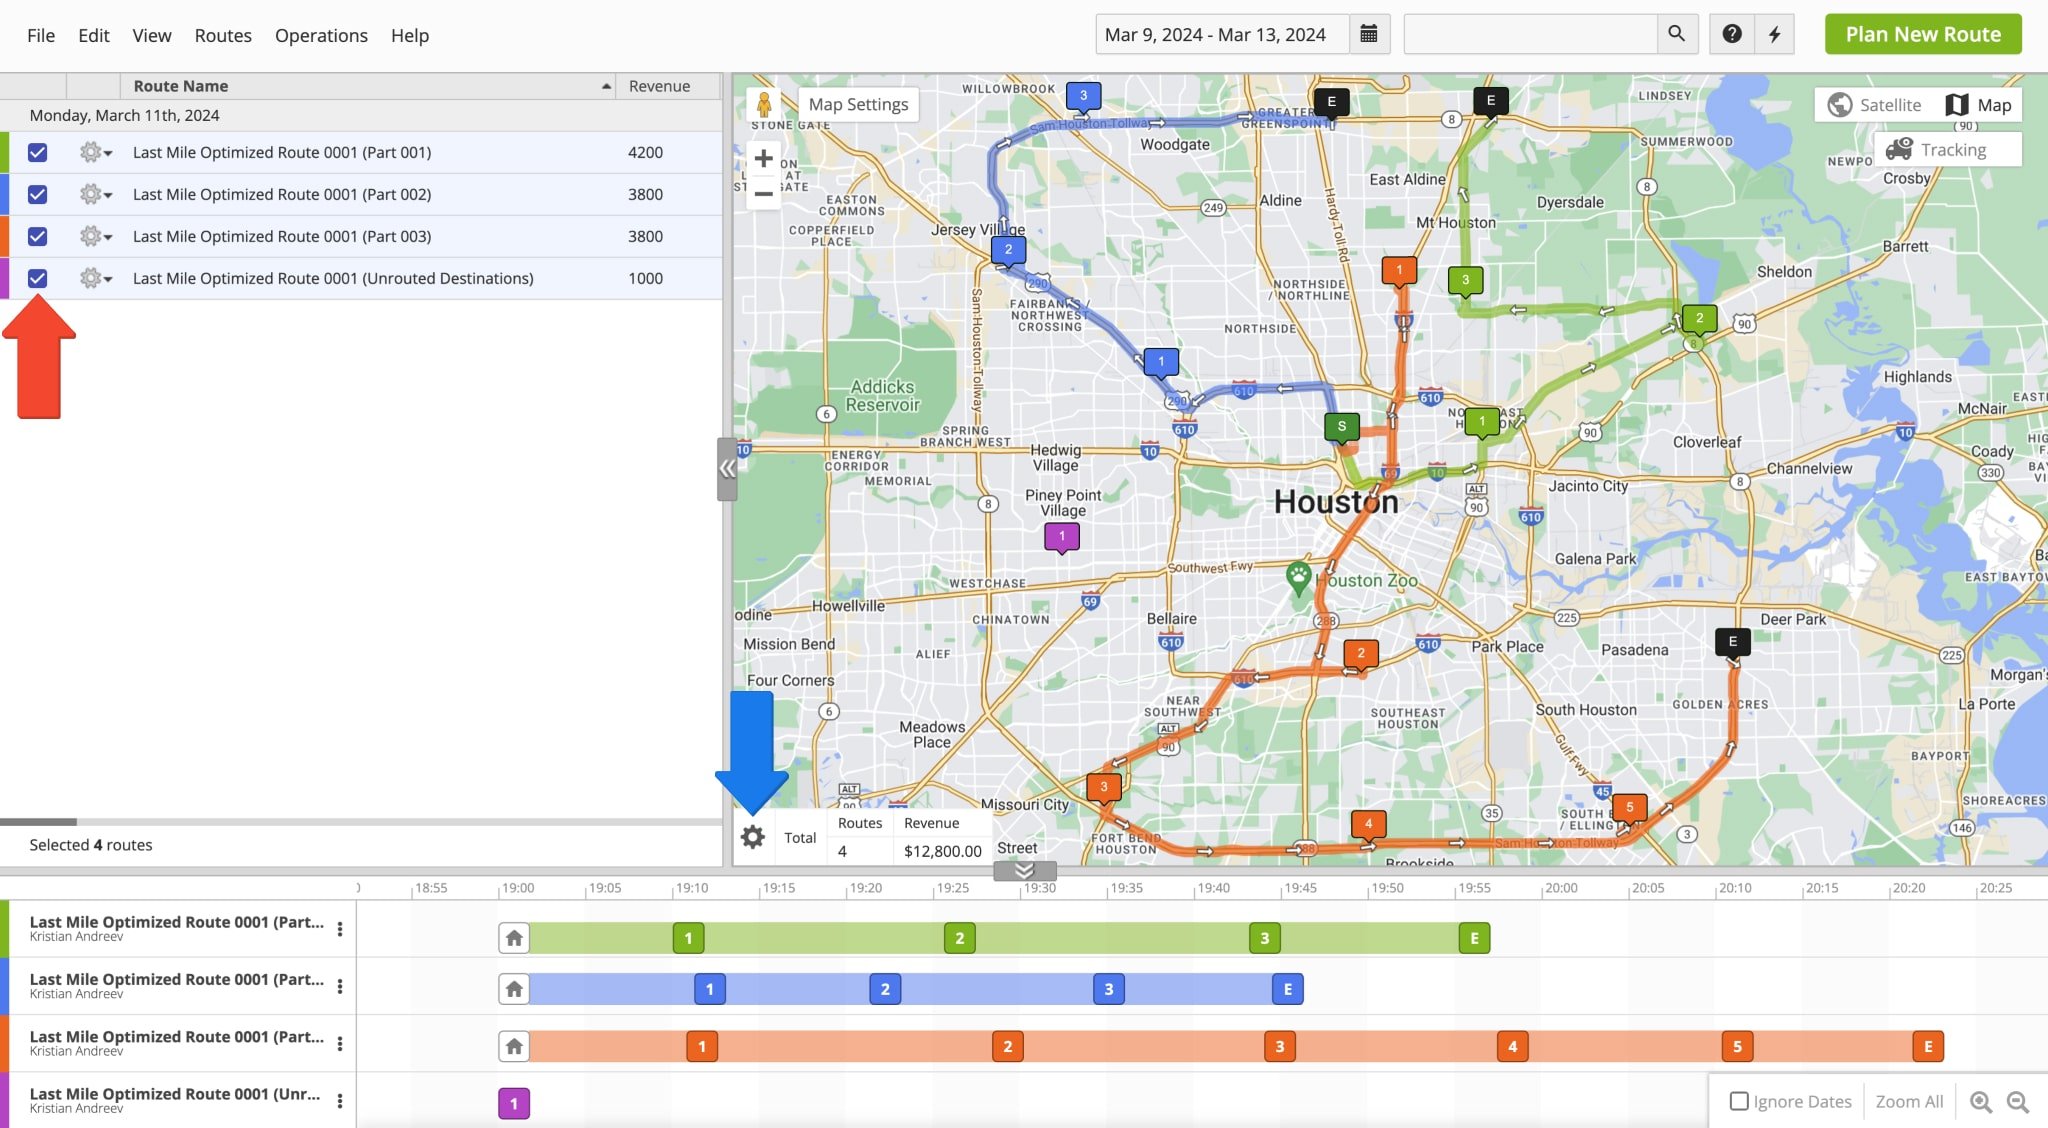 View your planned and distributed Max Revenue routes on the interactive Routes Map.